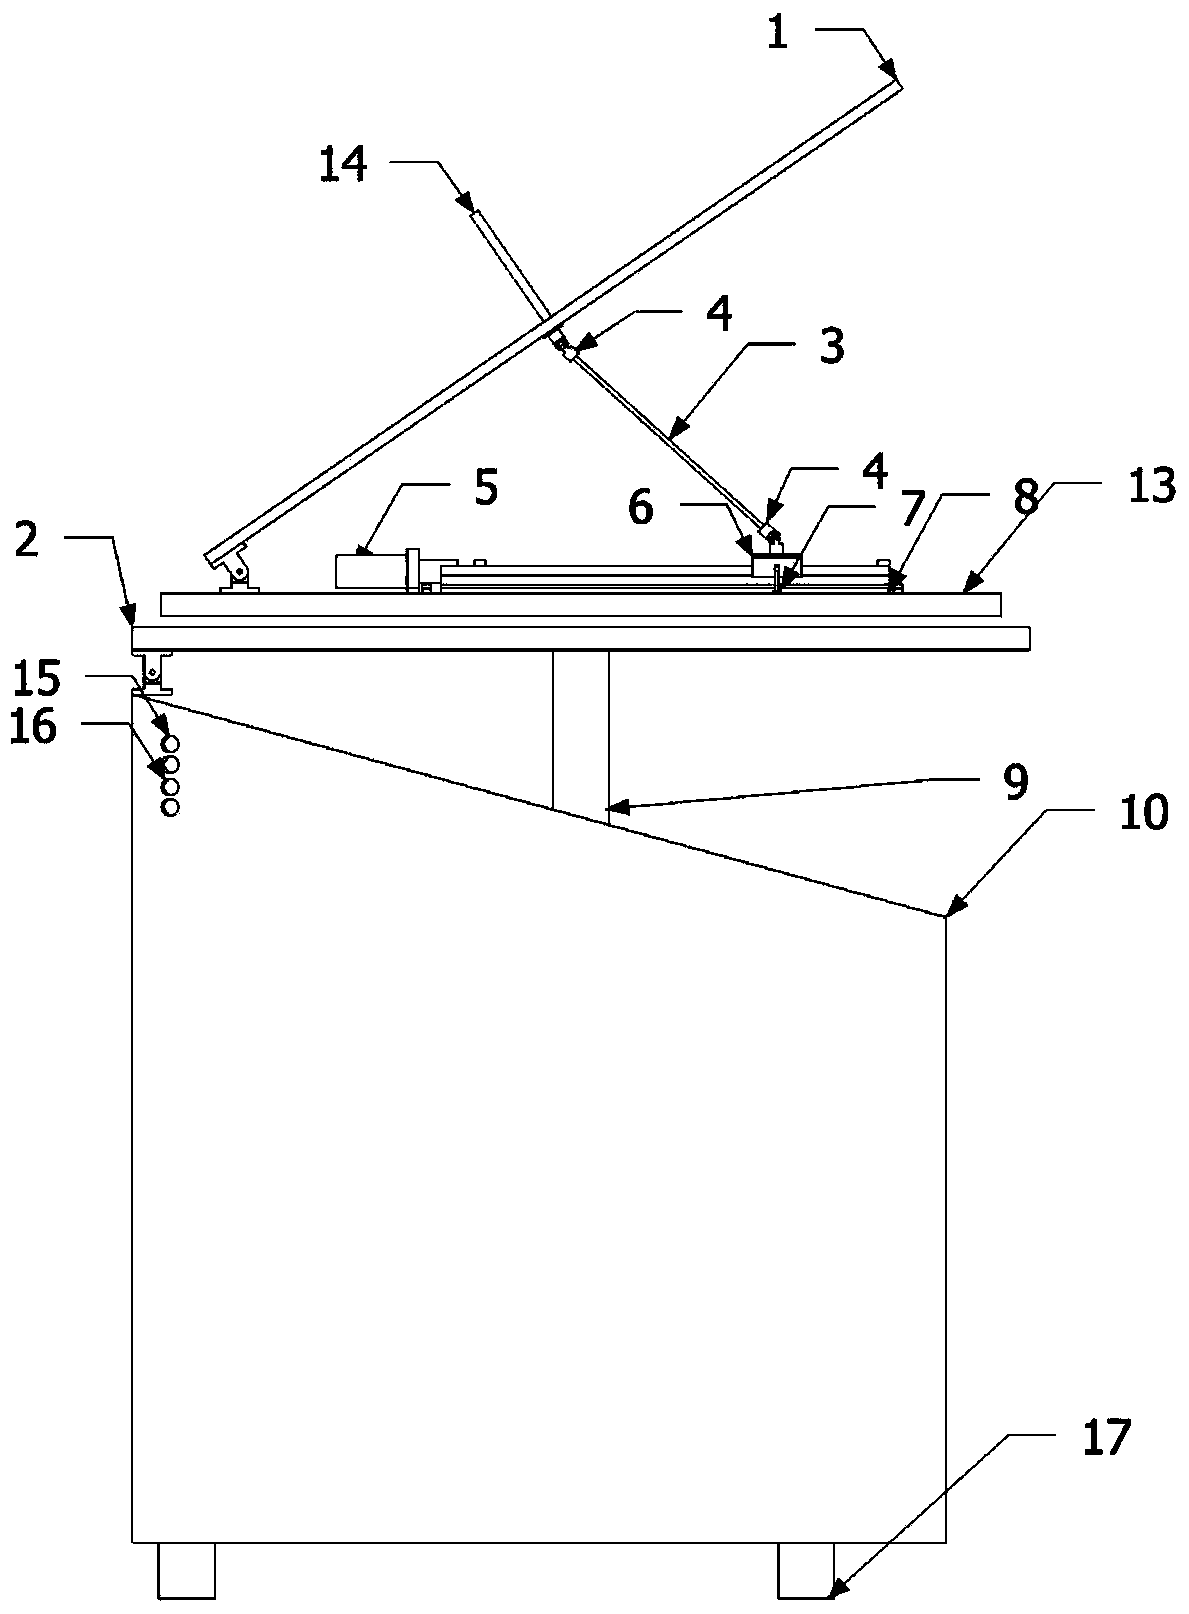 Experimental apparatus for sunlight projection simulation